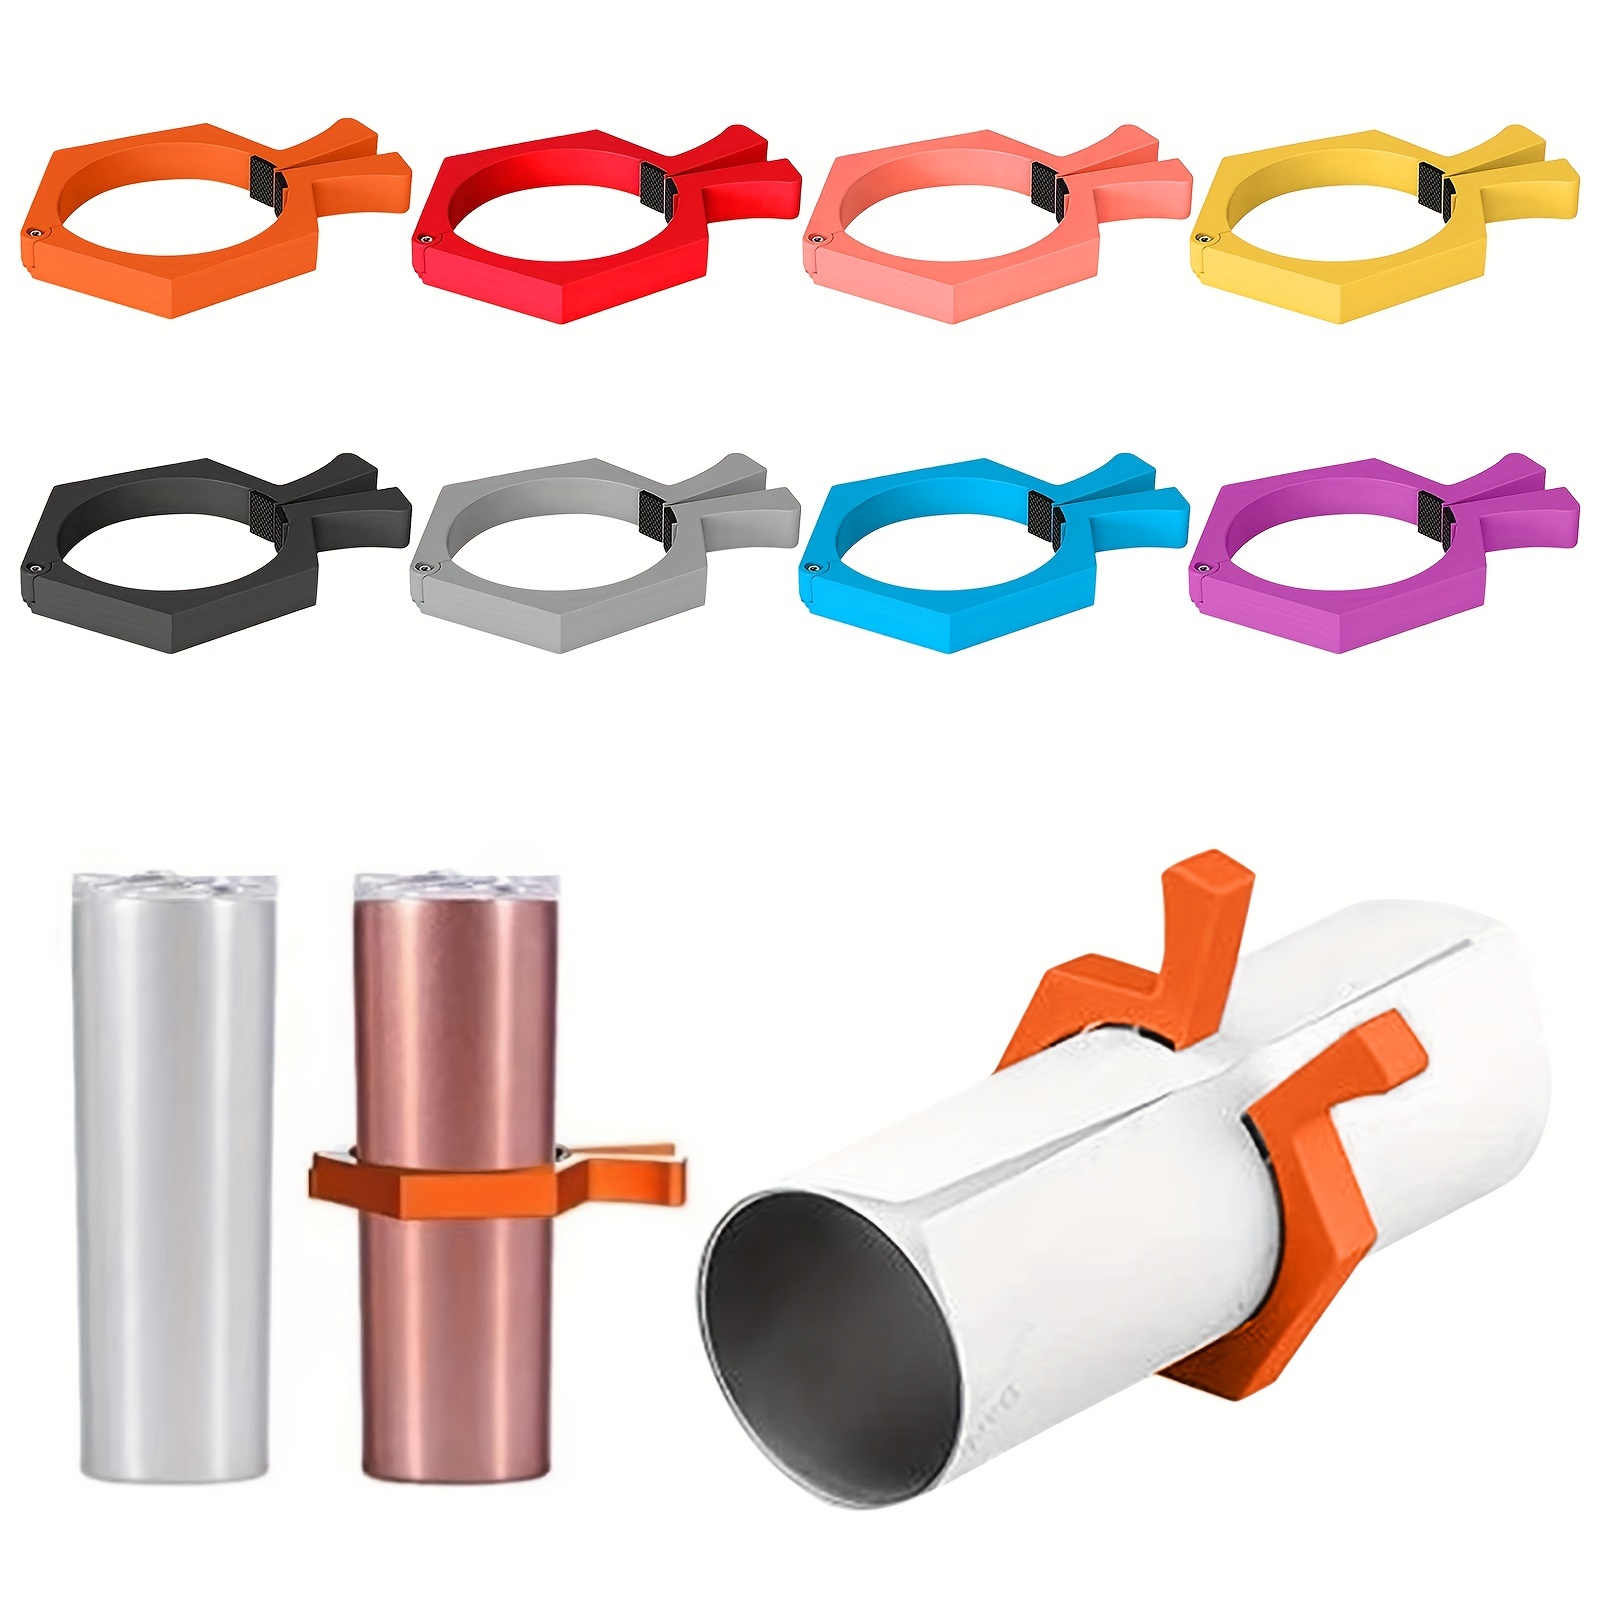 2 In 1 Pinch Perfect Tumbler Clamp,Tumbler Pincher Tool Sublimation For  20/16/12 Oz Sublimation Blanks Tumblers - Sublimation Accessories And  Supplies